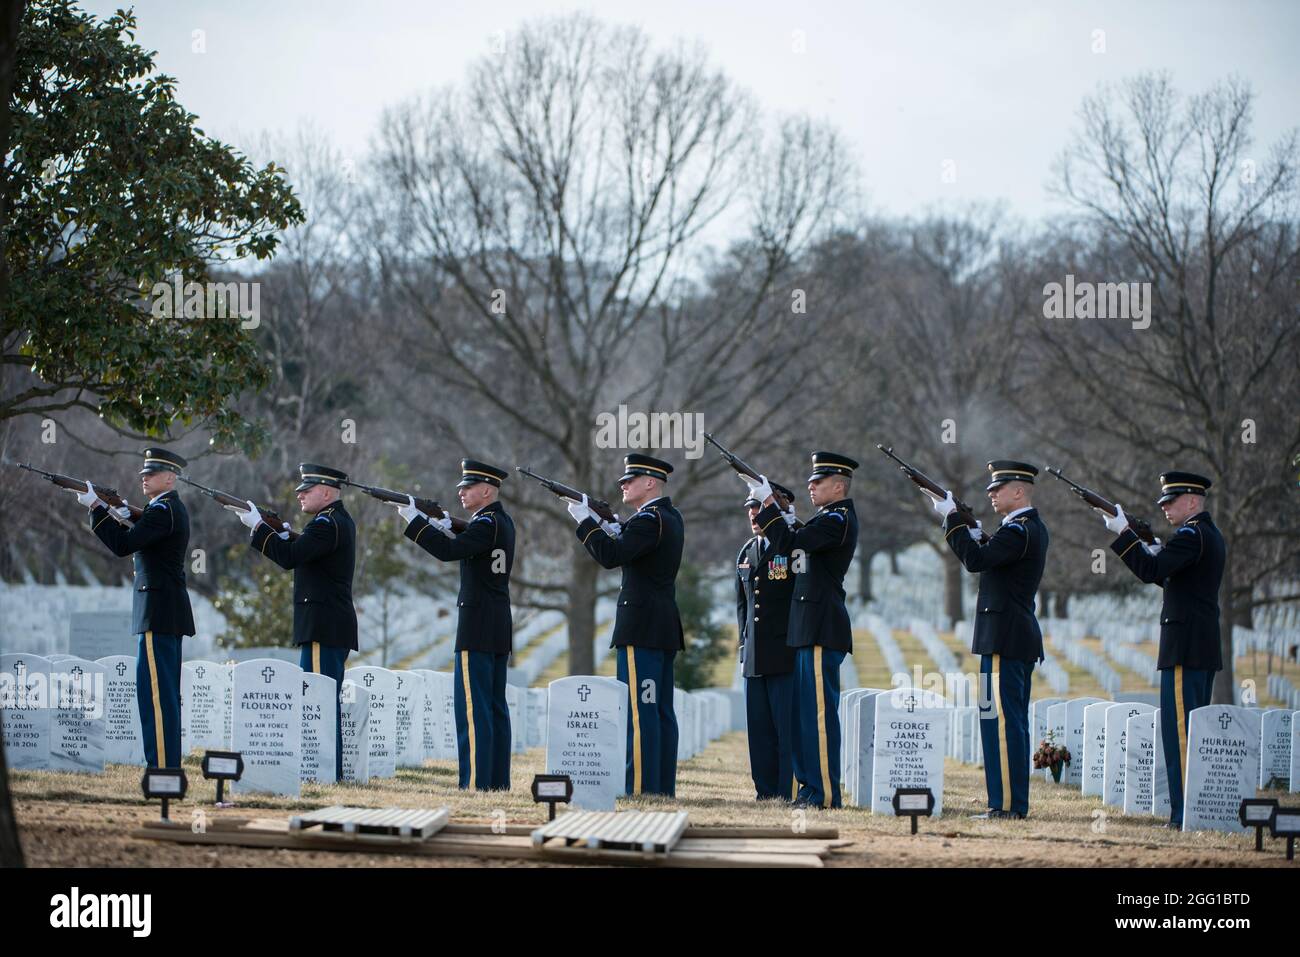 The U.S. Army Honor Guard firing party fires 3 folleys during the funeral of U.S. Army Sgt. 1st Class Mihail Golin in Section 60 of Arlington National Cemetery, Arlington, Virginia, Jan. 22, 2018. Golin, an 18B Special Forces Weapons Sergeant assigned to 10th Special Forces Group (Airborne) died Jan. 1, 2018, as a result of wounds sustained while engaged in combat operations in Nangarhar Province, Afghanistan.  Golin deployed to Afghanistan in September 2017 with the 2nd Battalion, 10th Special Forces Group, in support of Operation Freedom’s Sentinel.  Golin enlisted Jan. 5, 2005 and this was Stock Photo